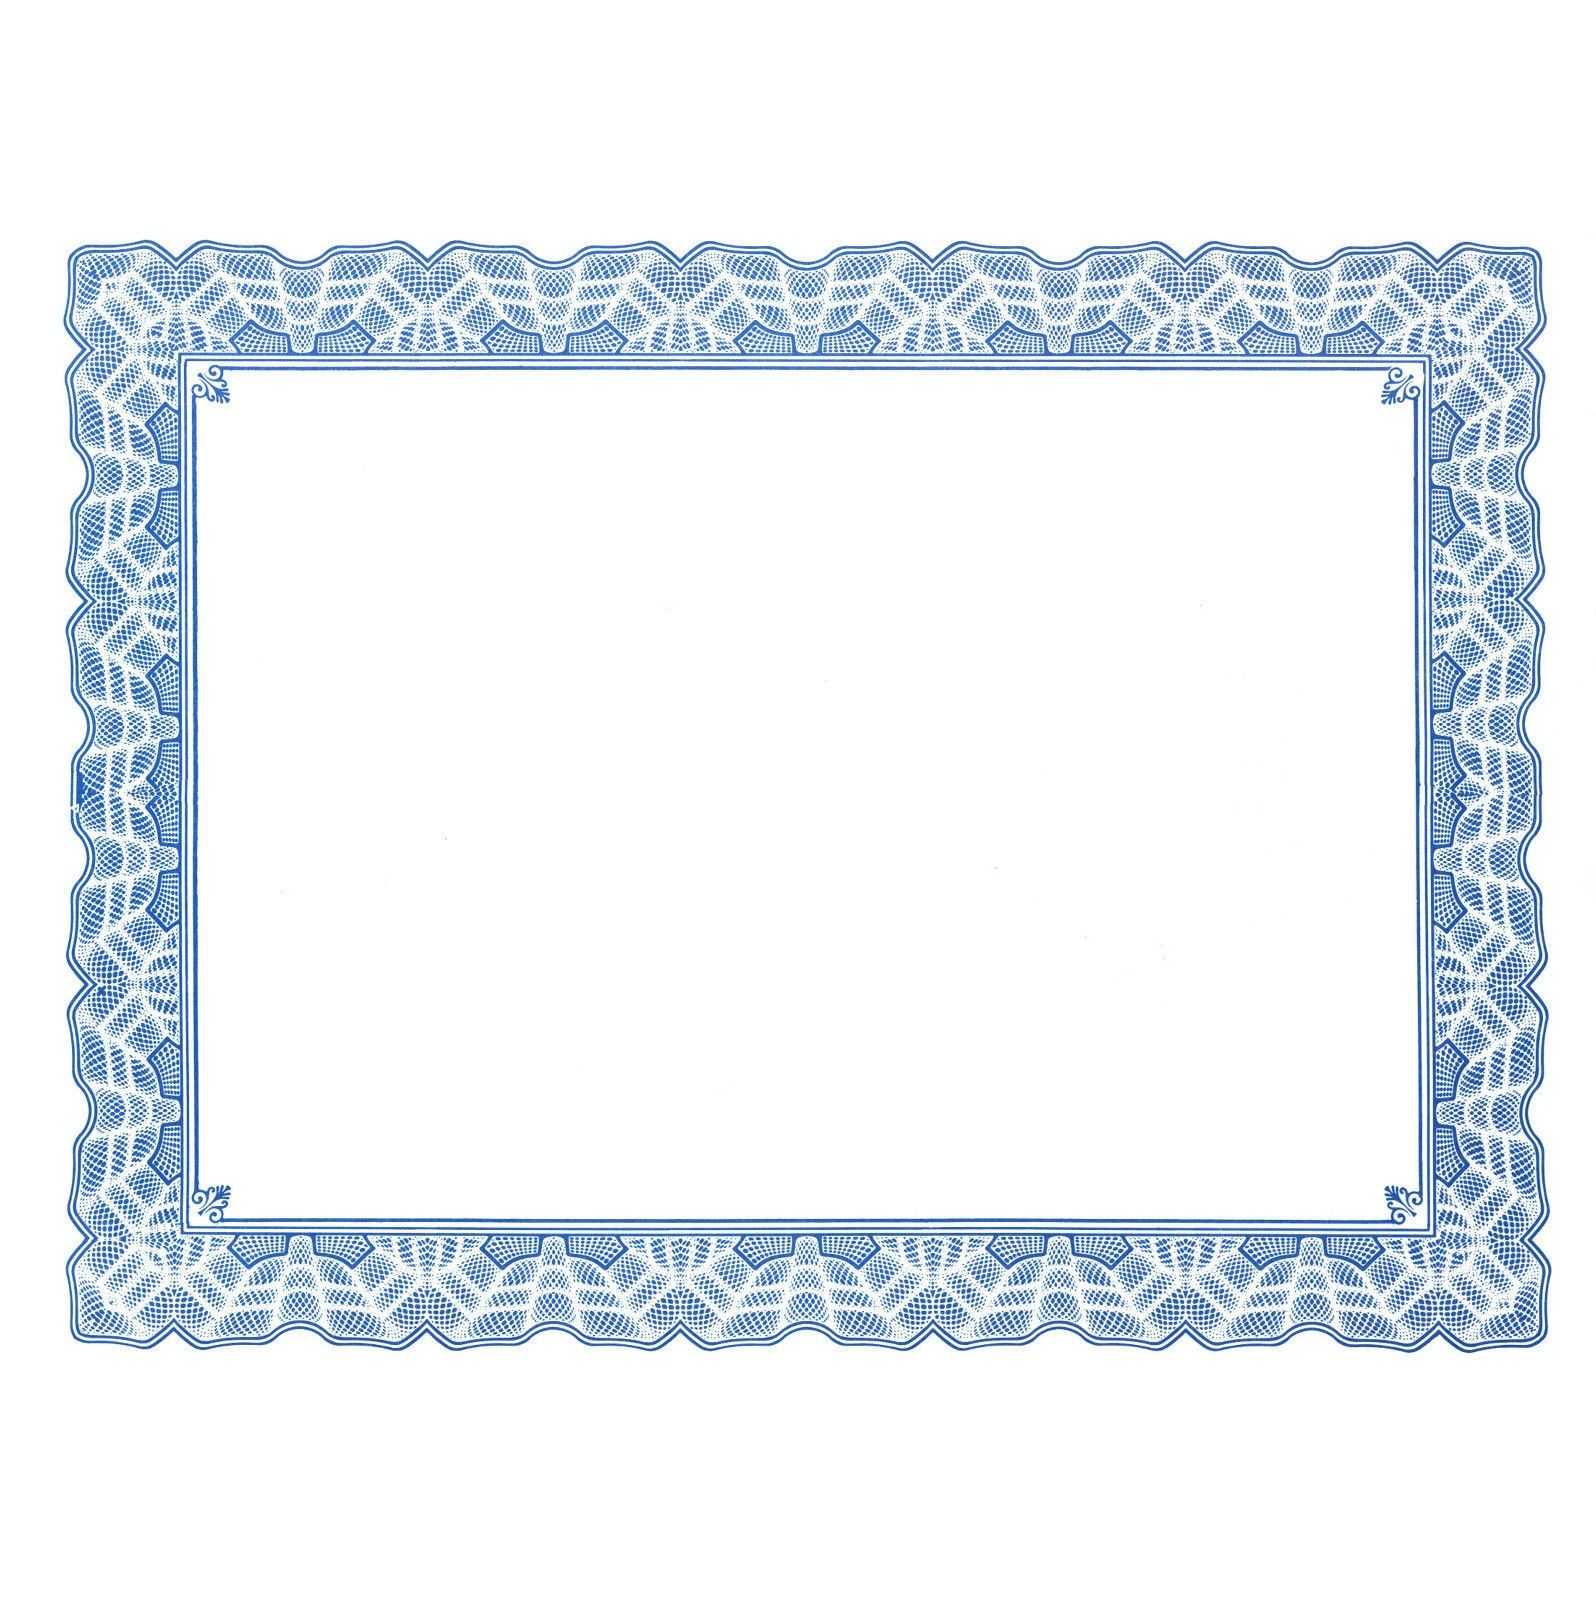 Free Certificate Border Templates For Word Regarding Free Certificate Templates For Word 2007